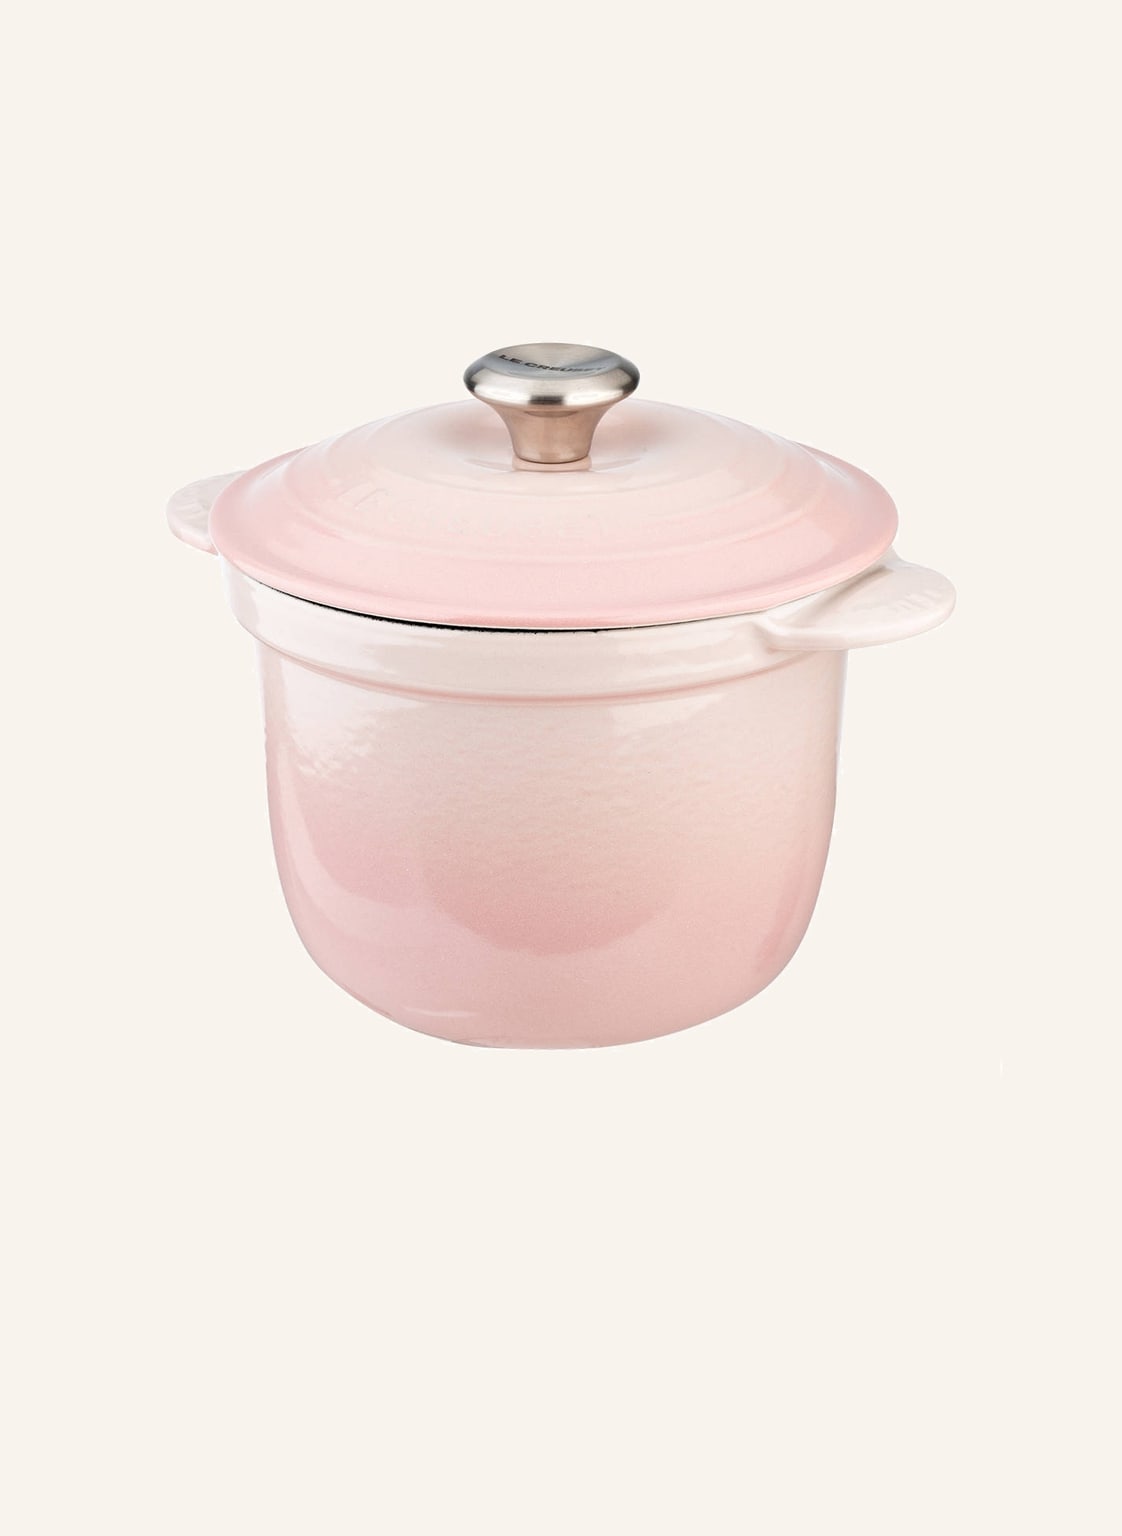 Image of Le Creuset Cocotte Every pink